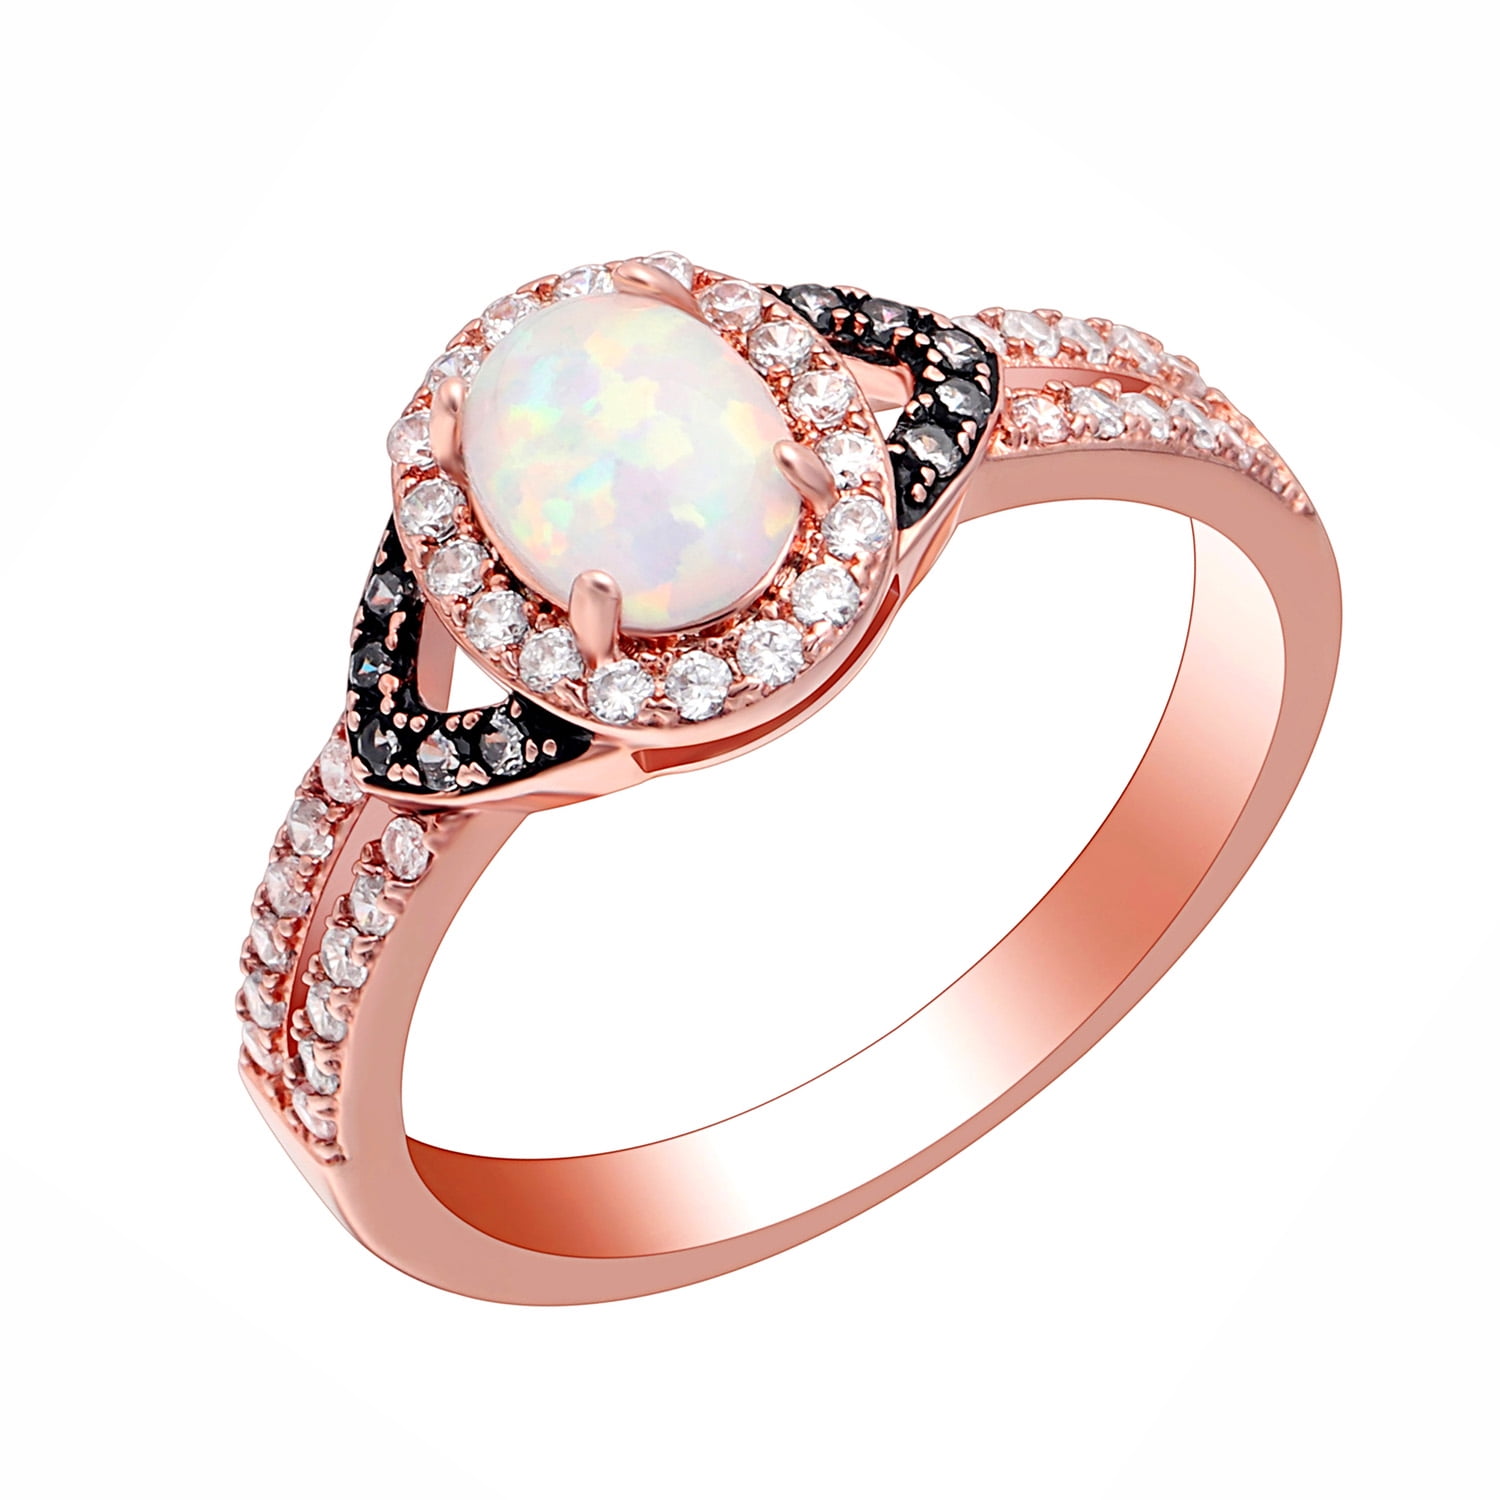 Chocolate Rose Gold Plated White Fire Opal Engagement Ring Women Ginger Lyne